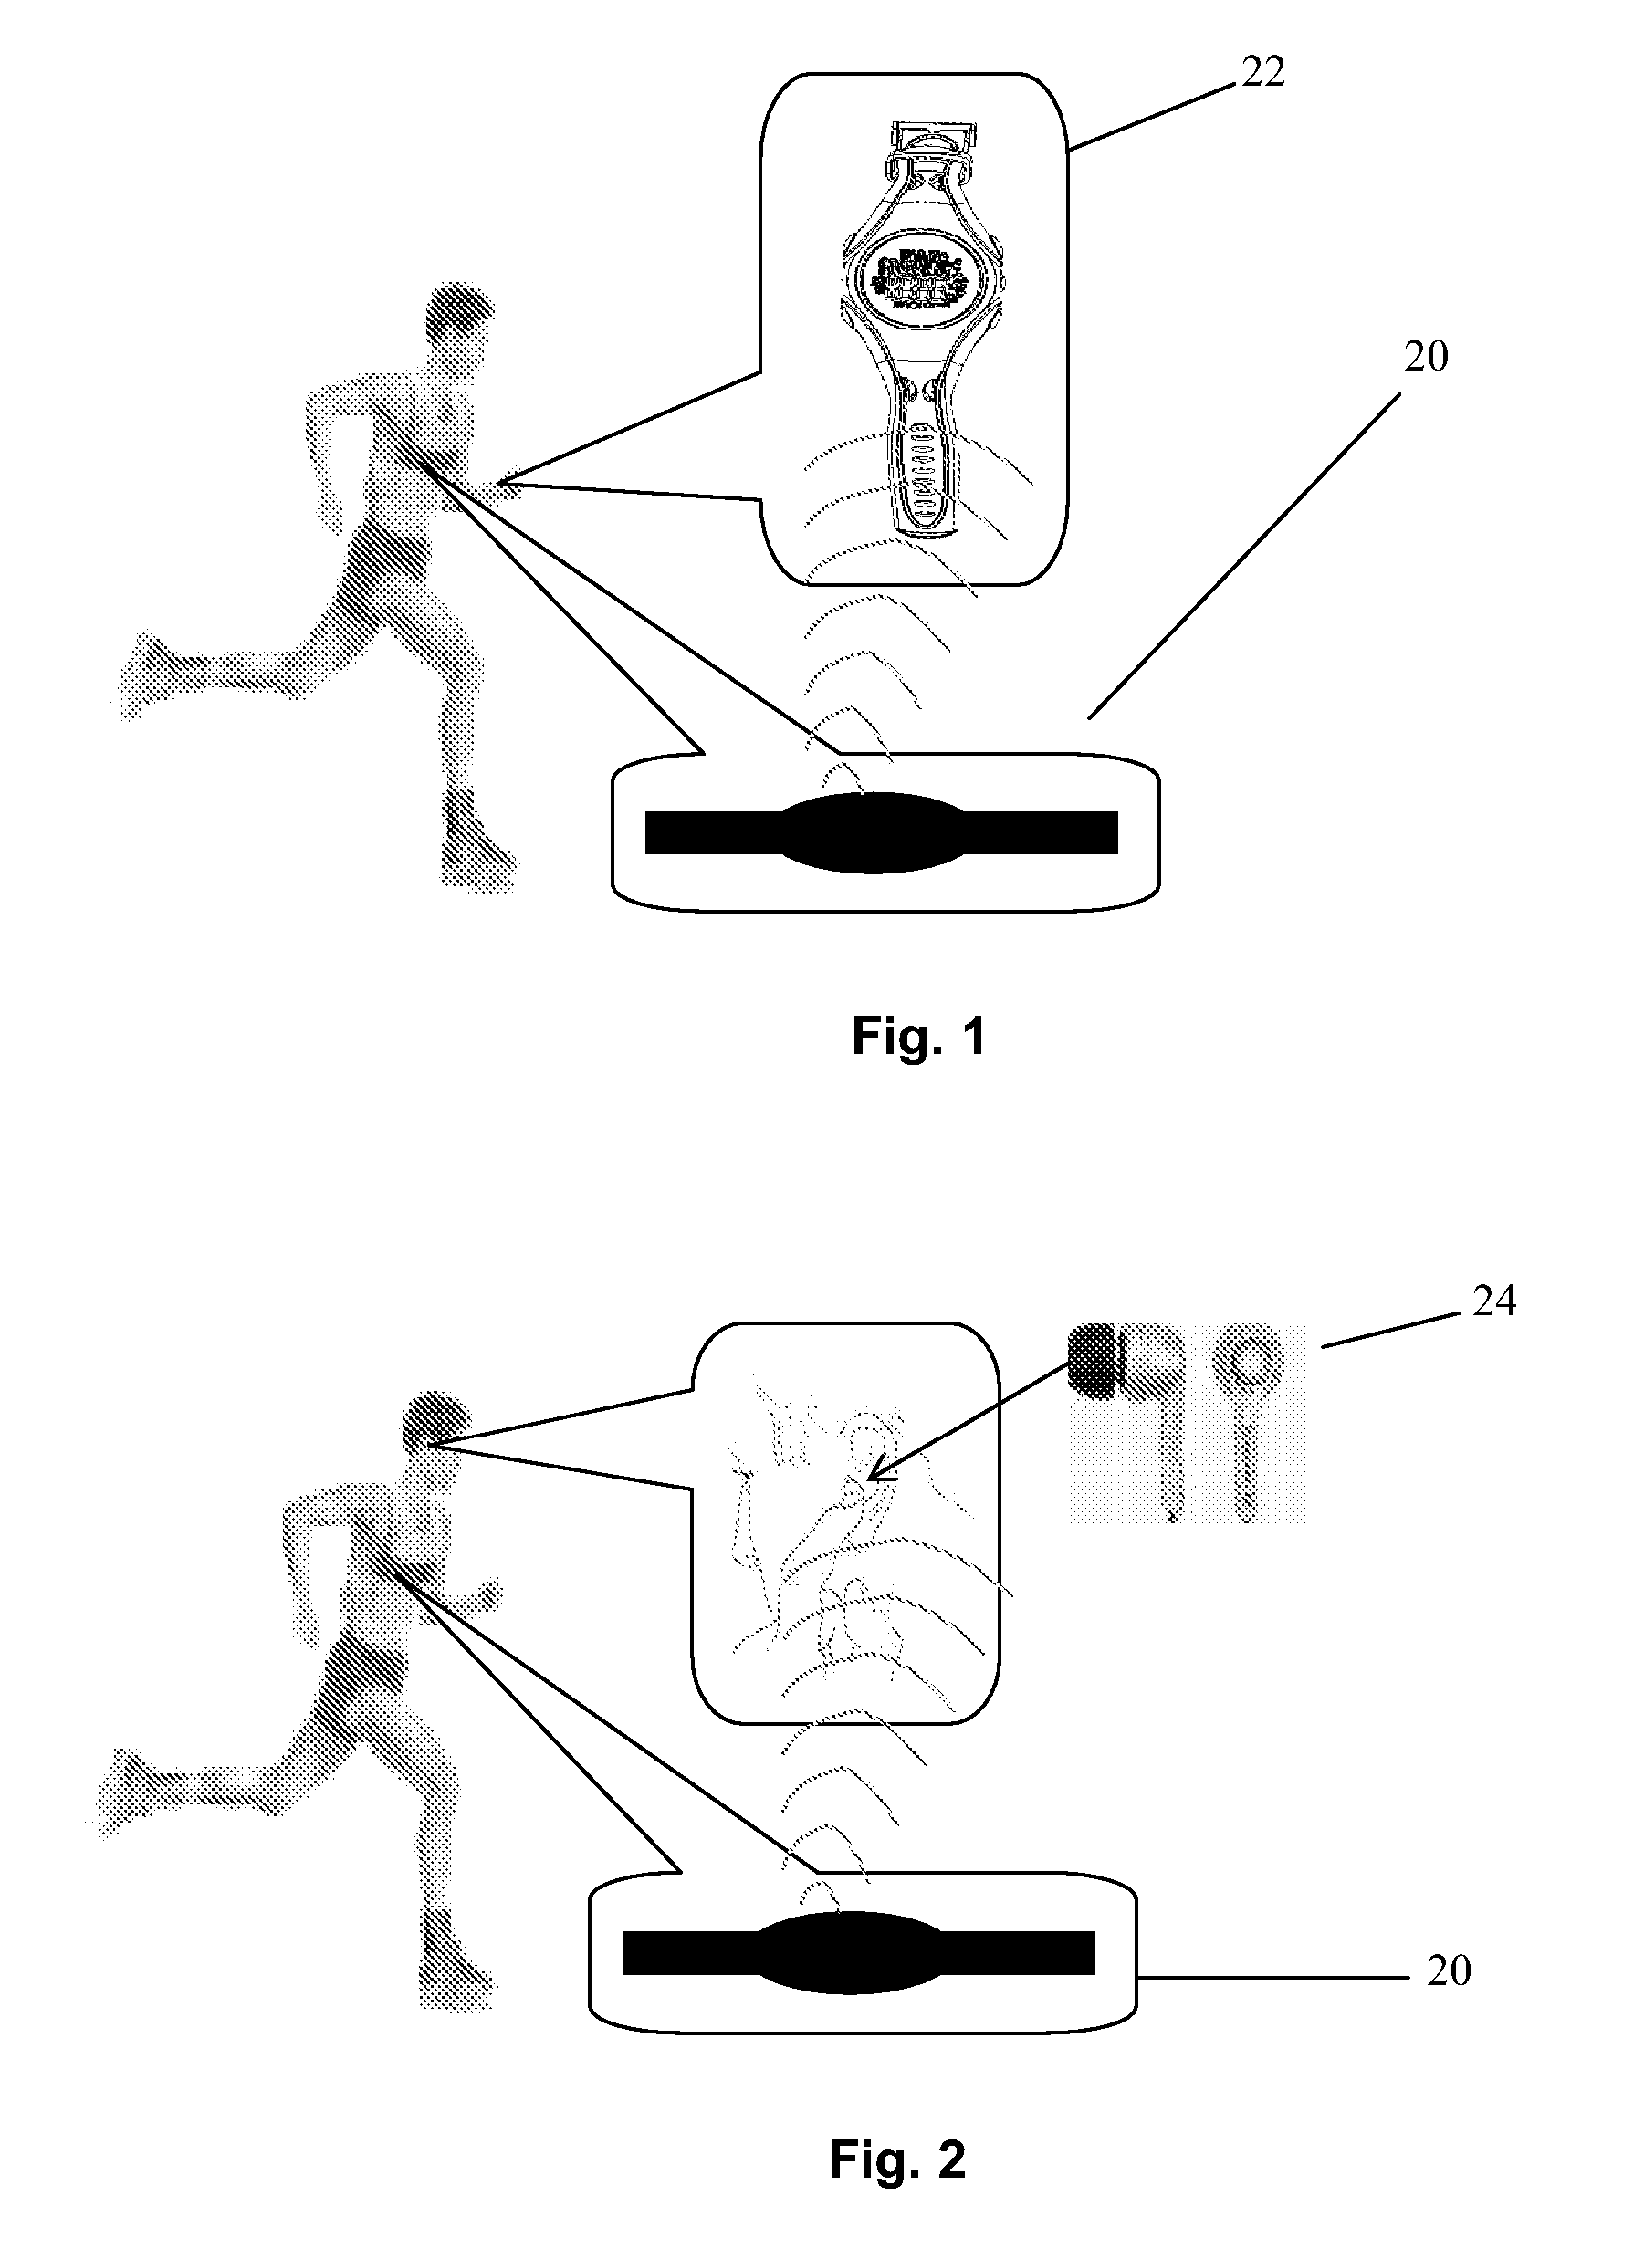 System and method for measuring gait kinematics information